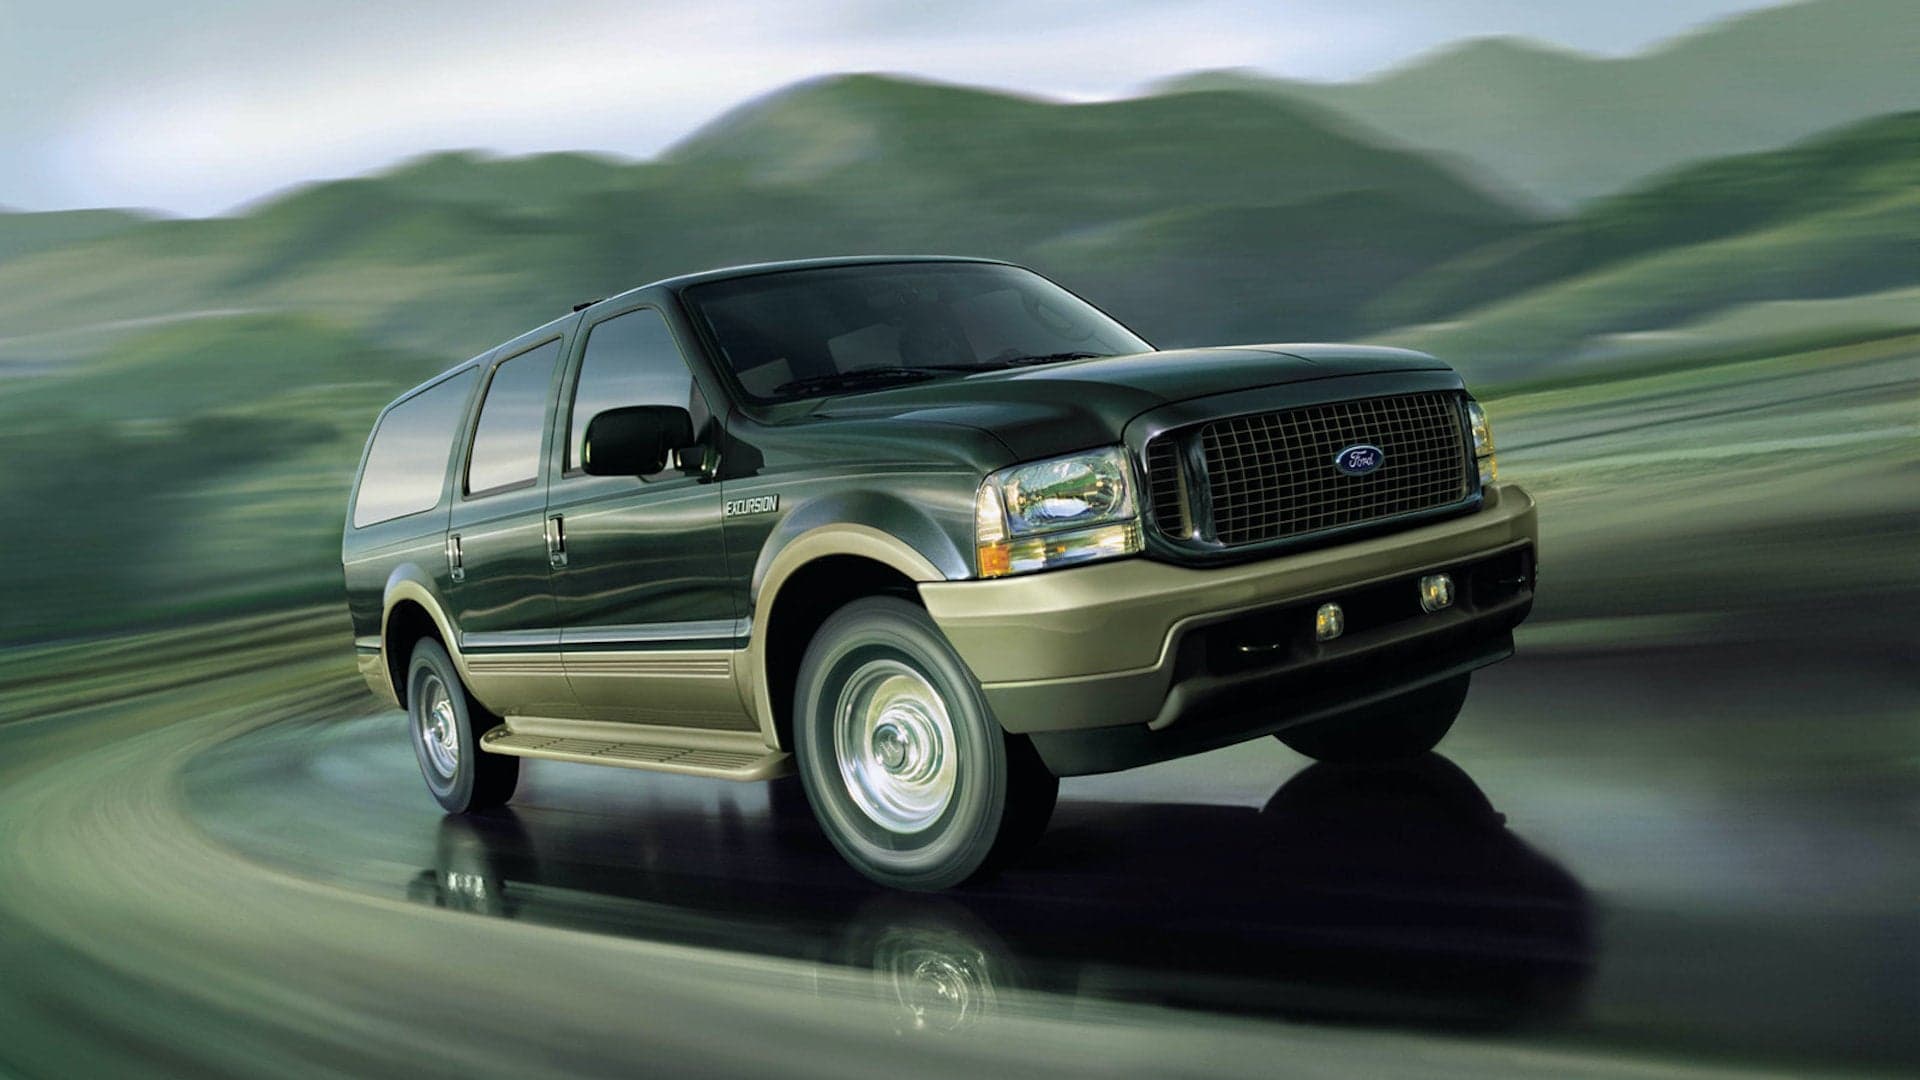 Ford Excursion Trademark Gets Renewed